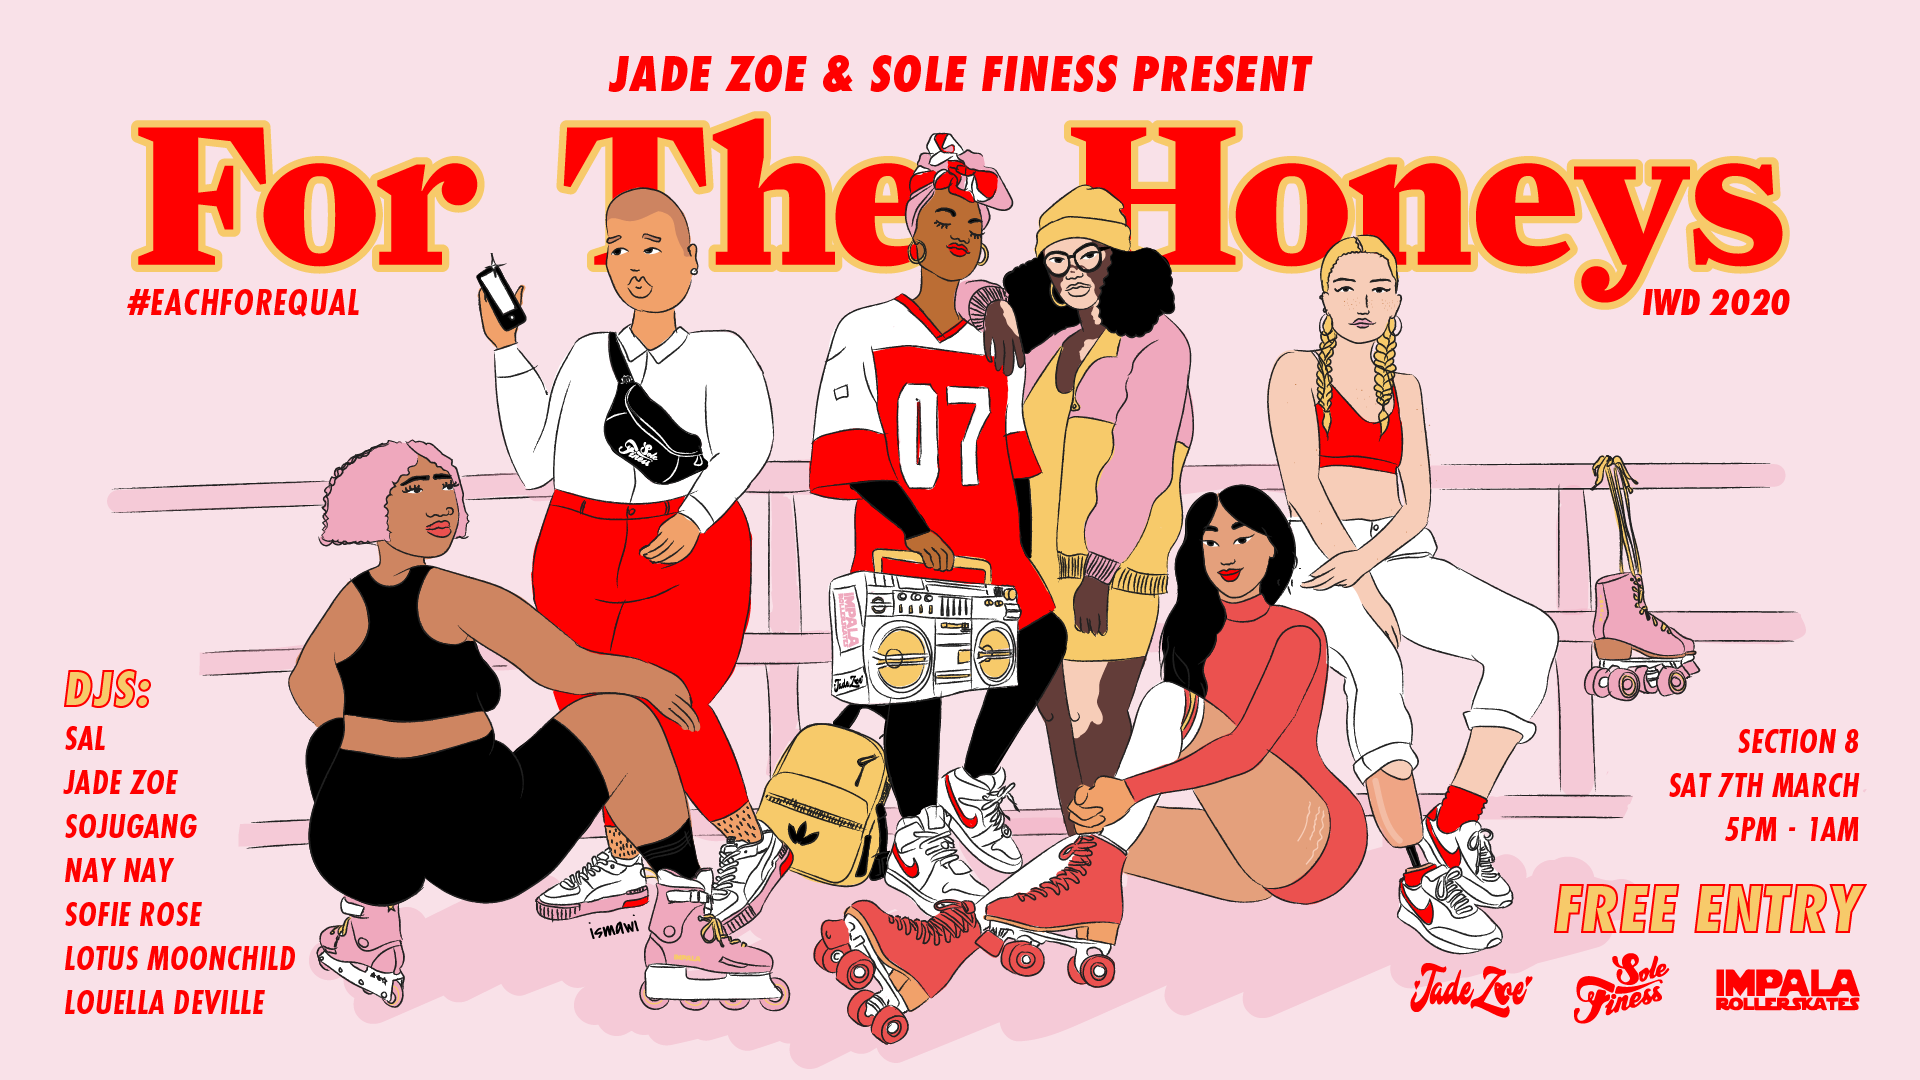 Jade Zoe & Sole Finess present: For The Honeys #IWD2020